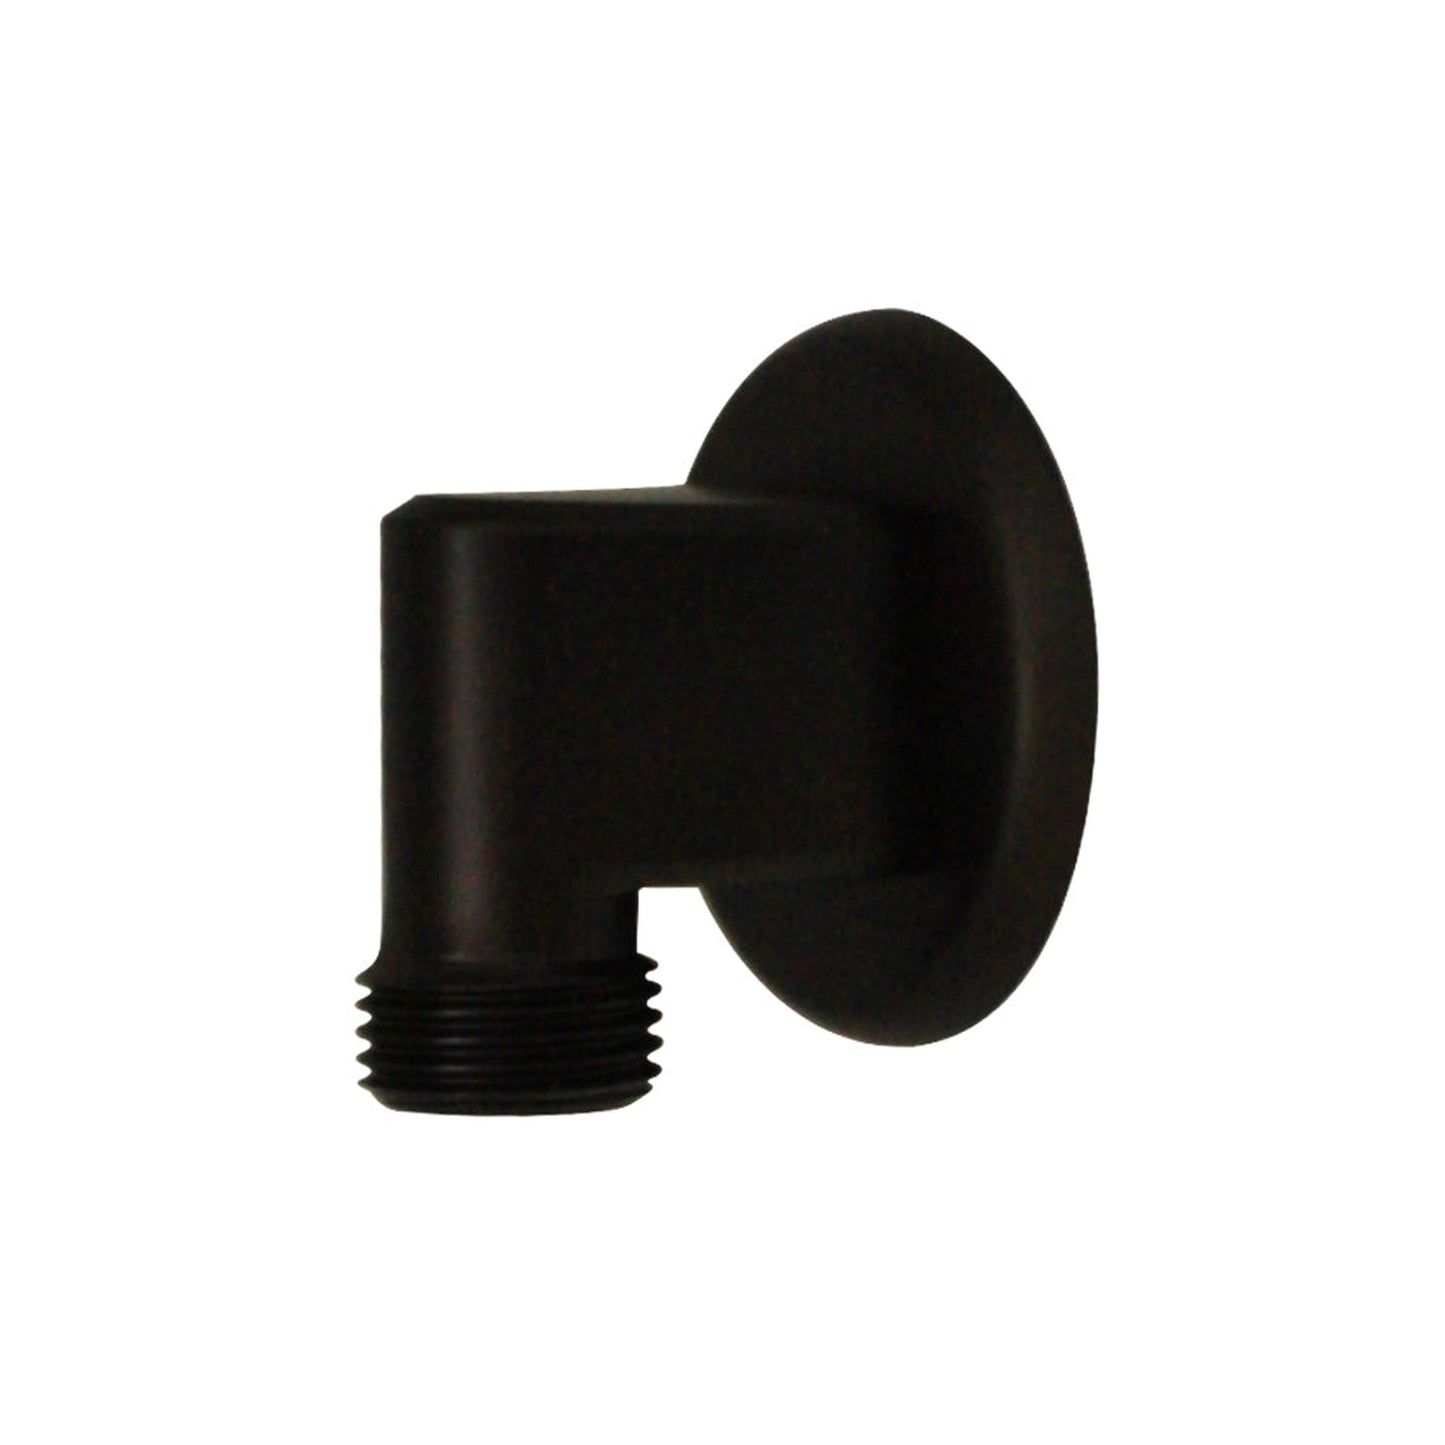 Whitehaus Showerhaus WH173A5-ORB Oil Rubbed Bronze Solid Brass Supply Elbow